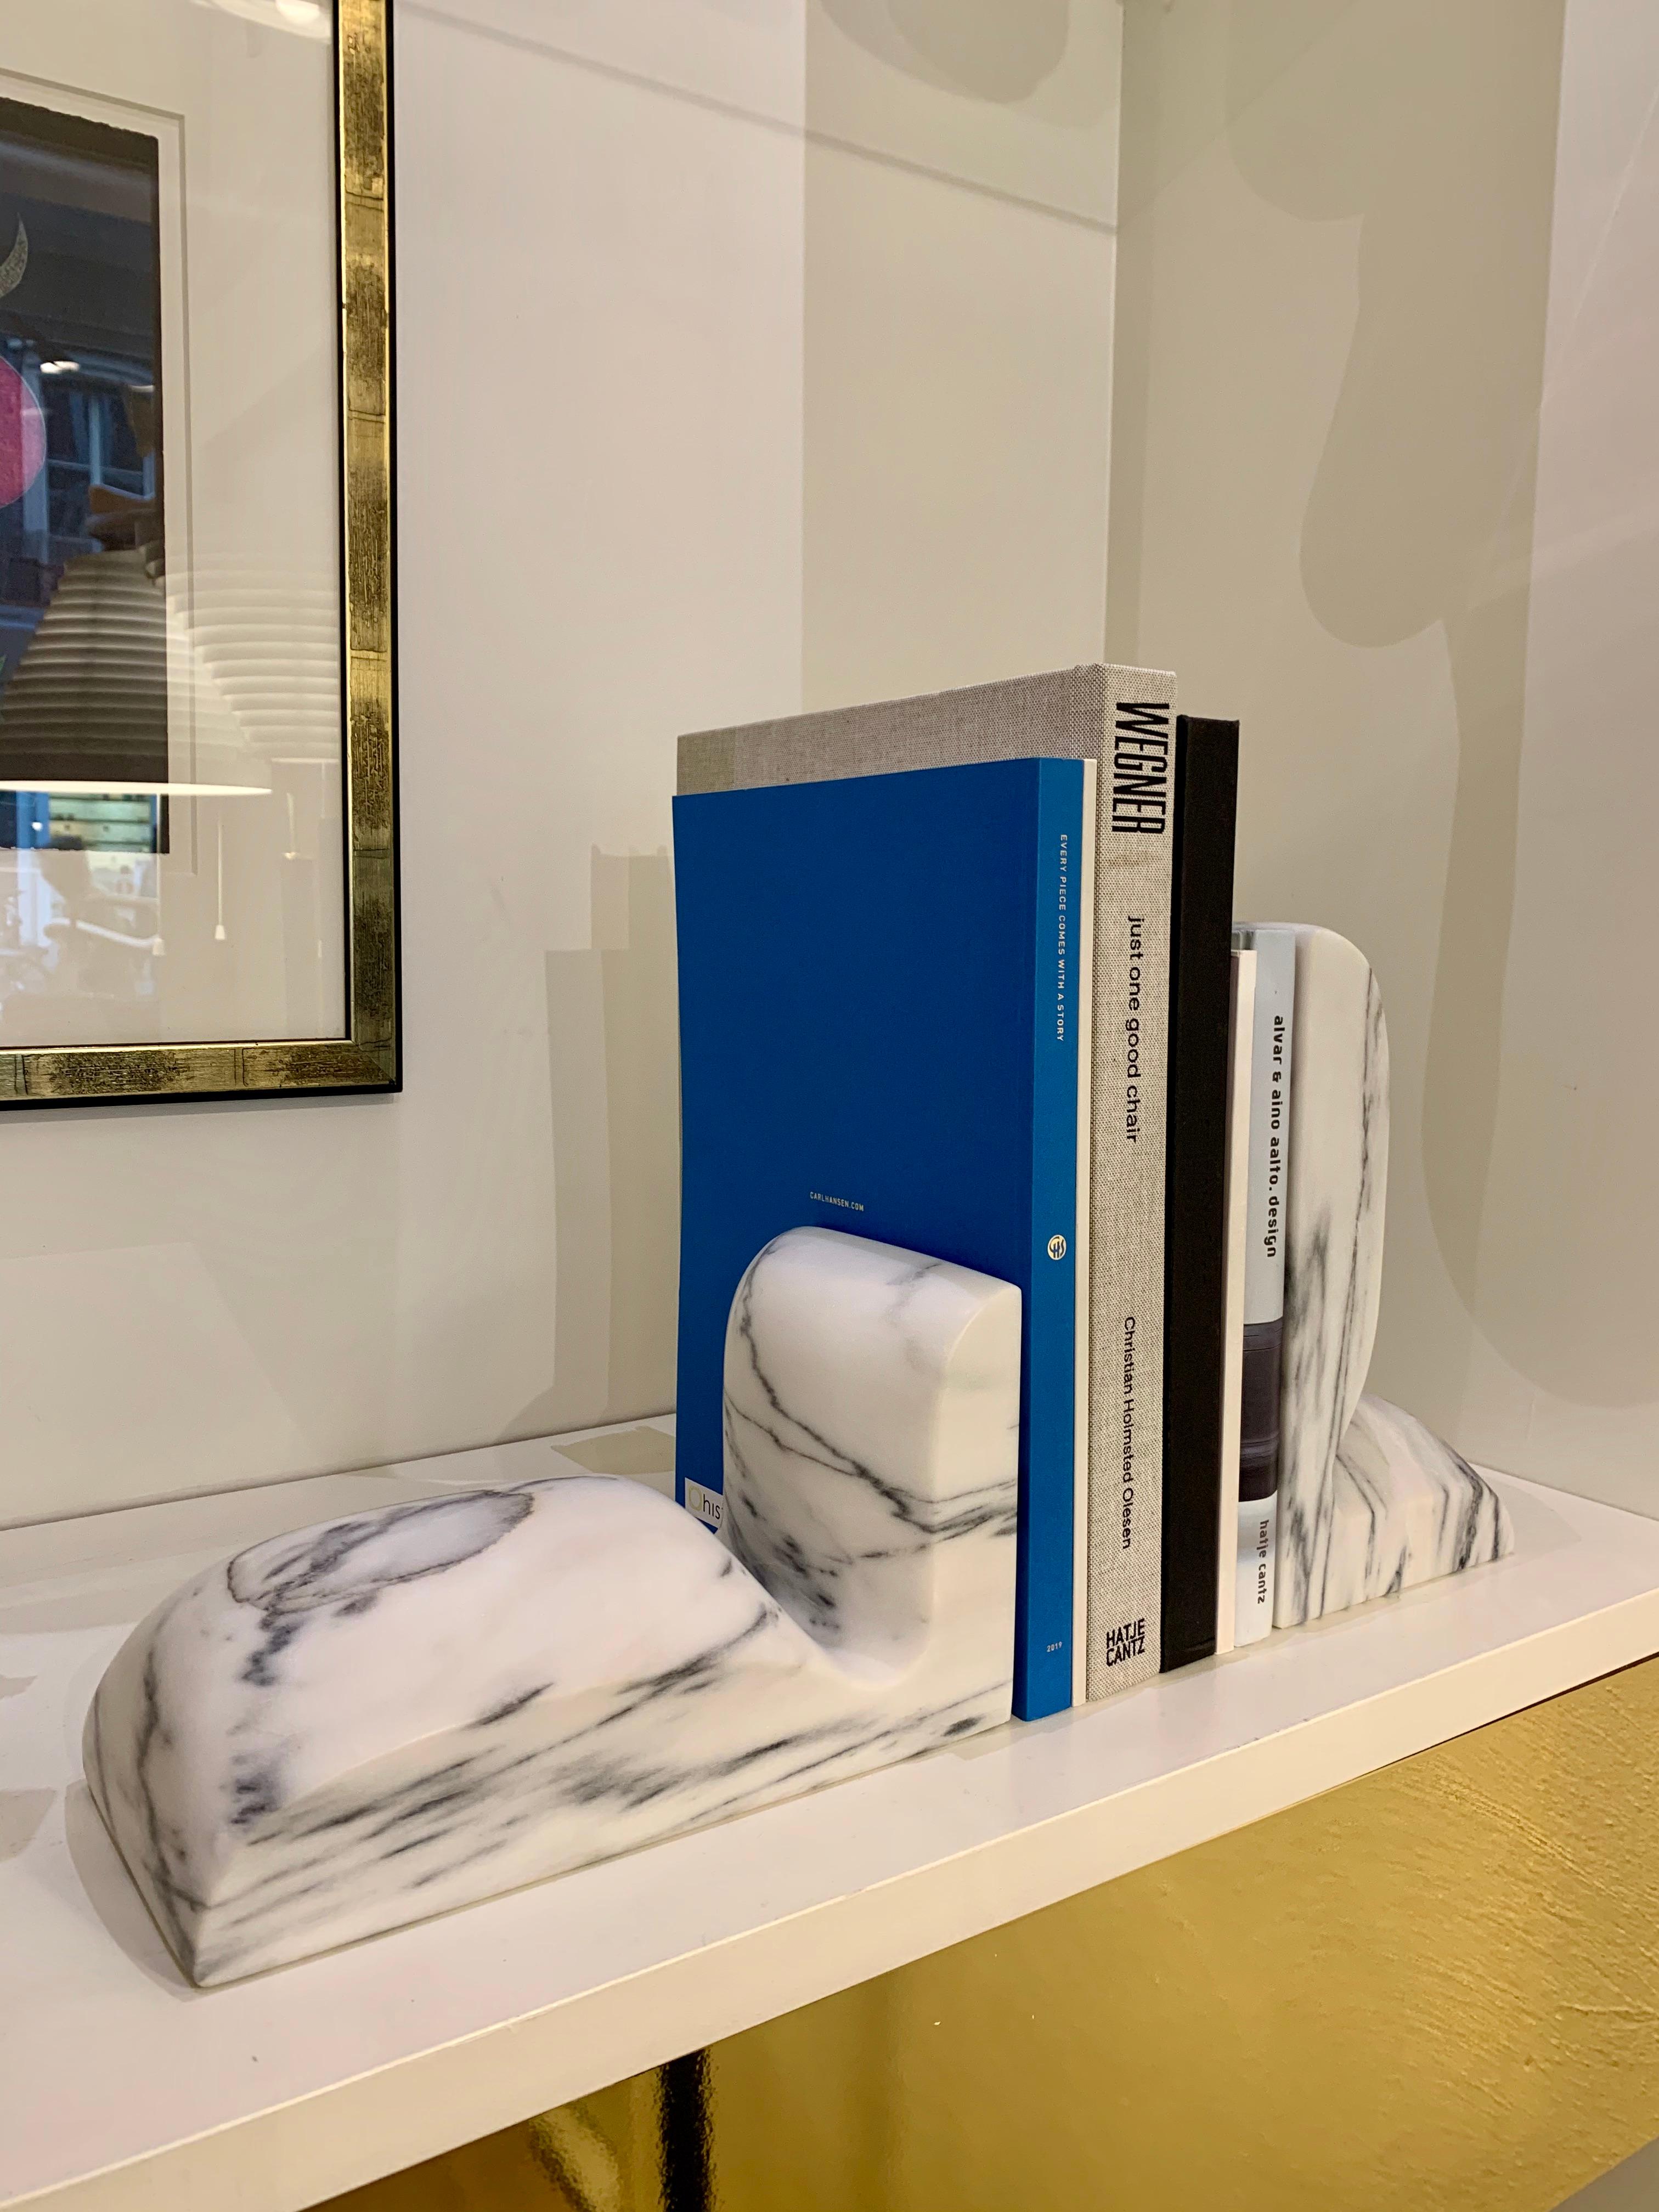 Modern Marble 'SLO' Book Ends by Christophe Delcourt for Collection Particulière 